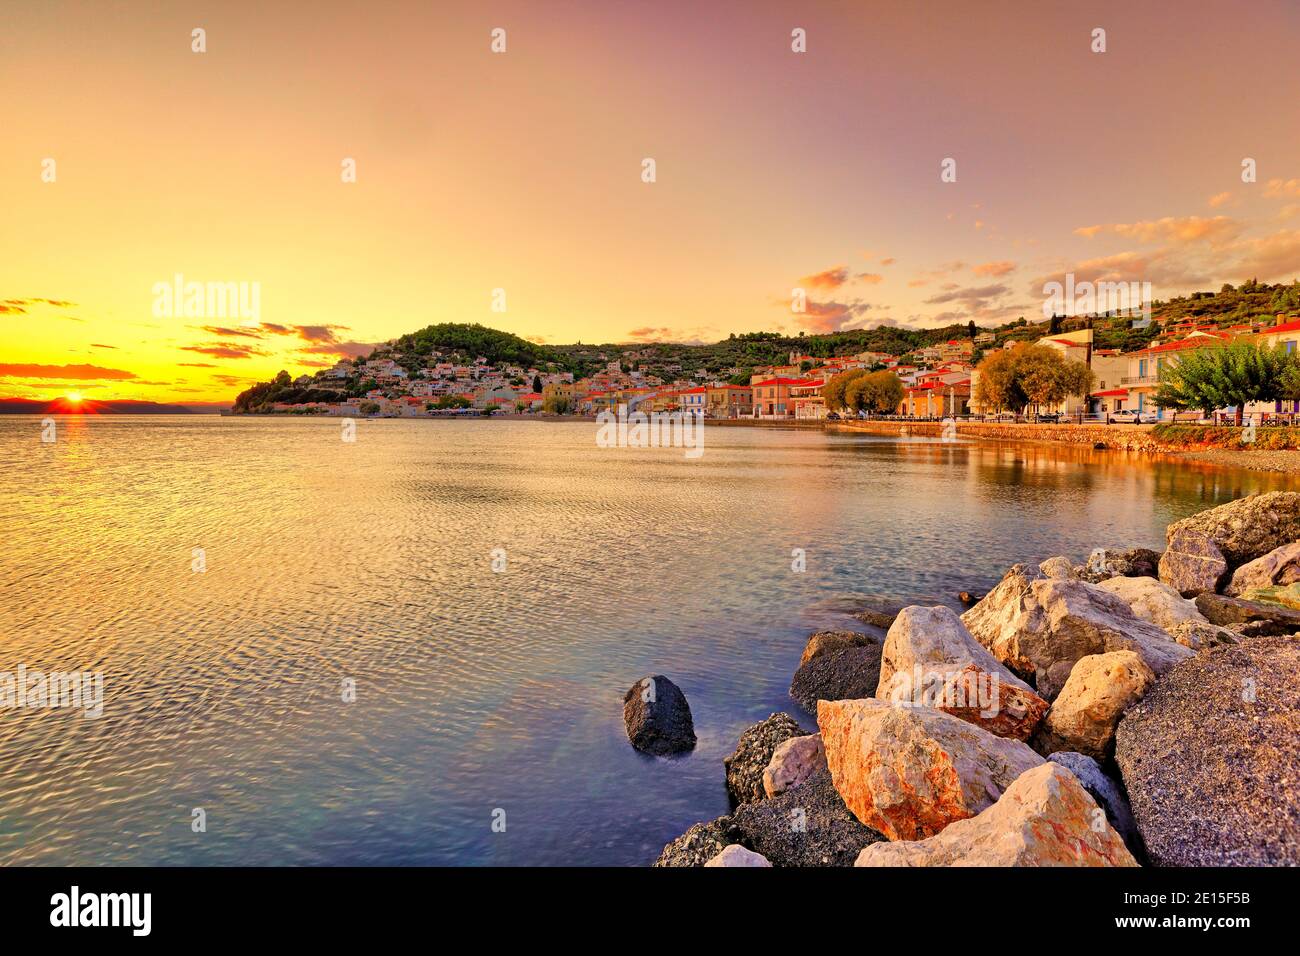 The sunset at Limni in Evia island, Greece Stock Photo